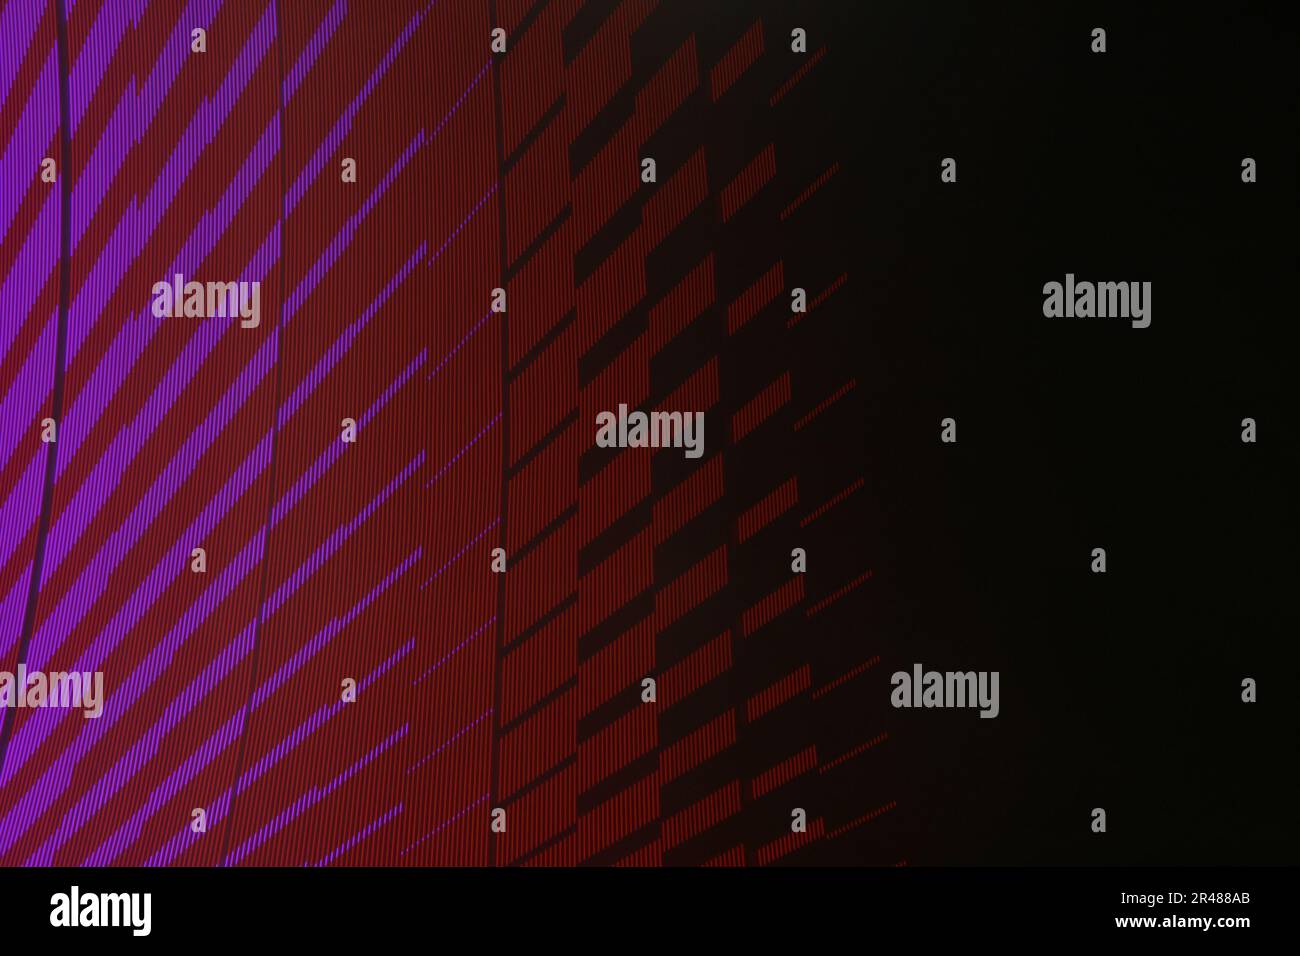 A large display featuring a pattern of purple and red lights radiating outward along distinct lines Stock Photo